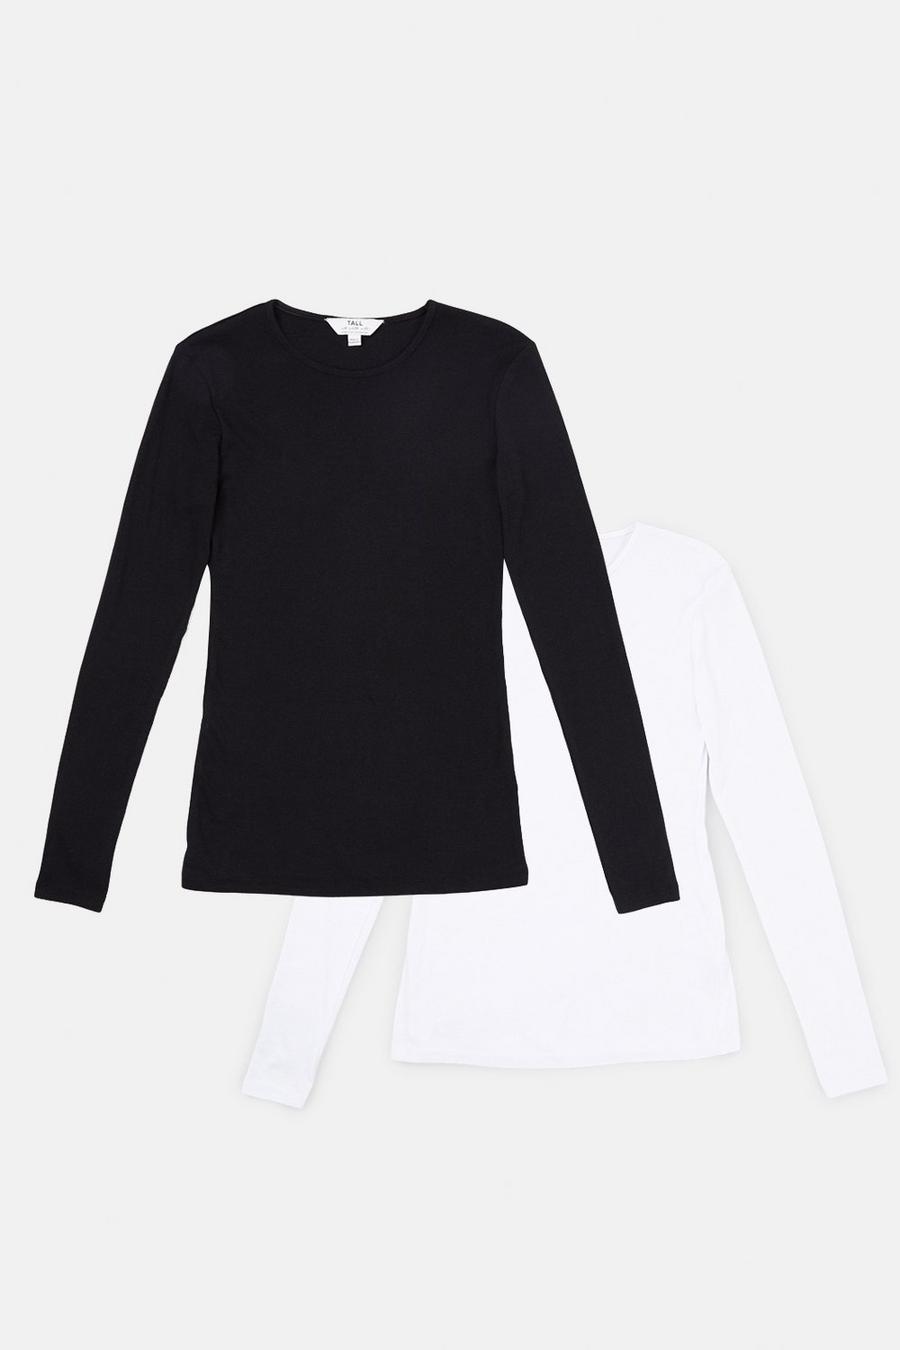 Tall Black and White 2 Pack Crew Neck Top